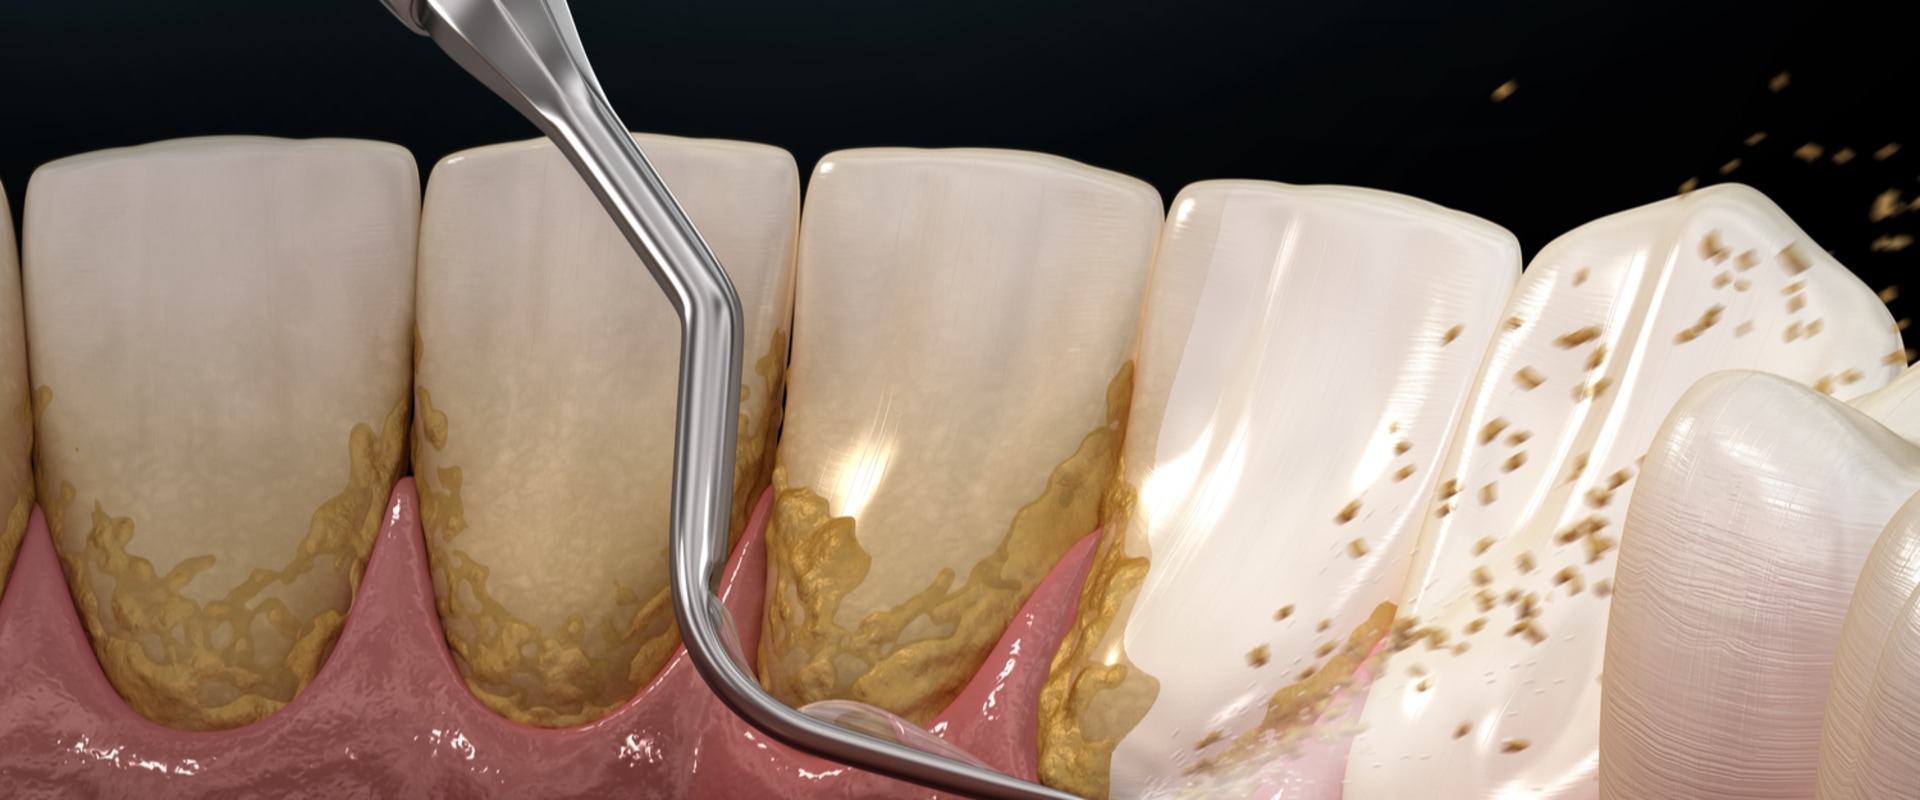 What are the Most Common Periodontal Procedures?